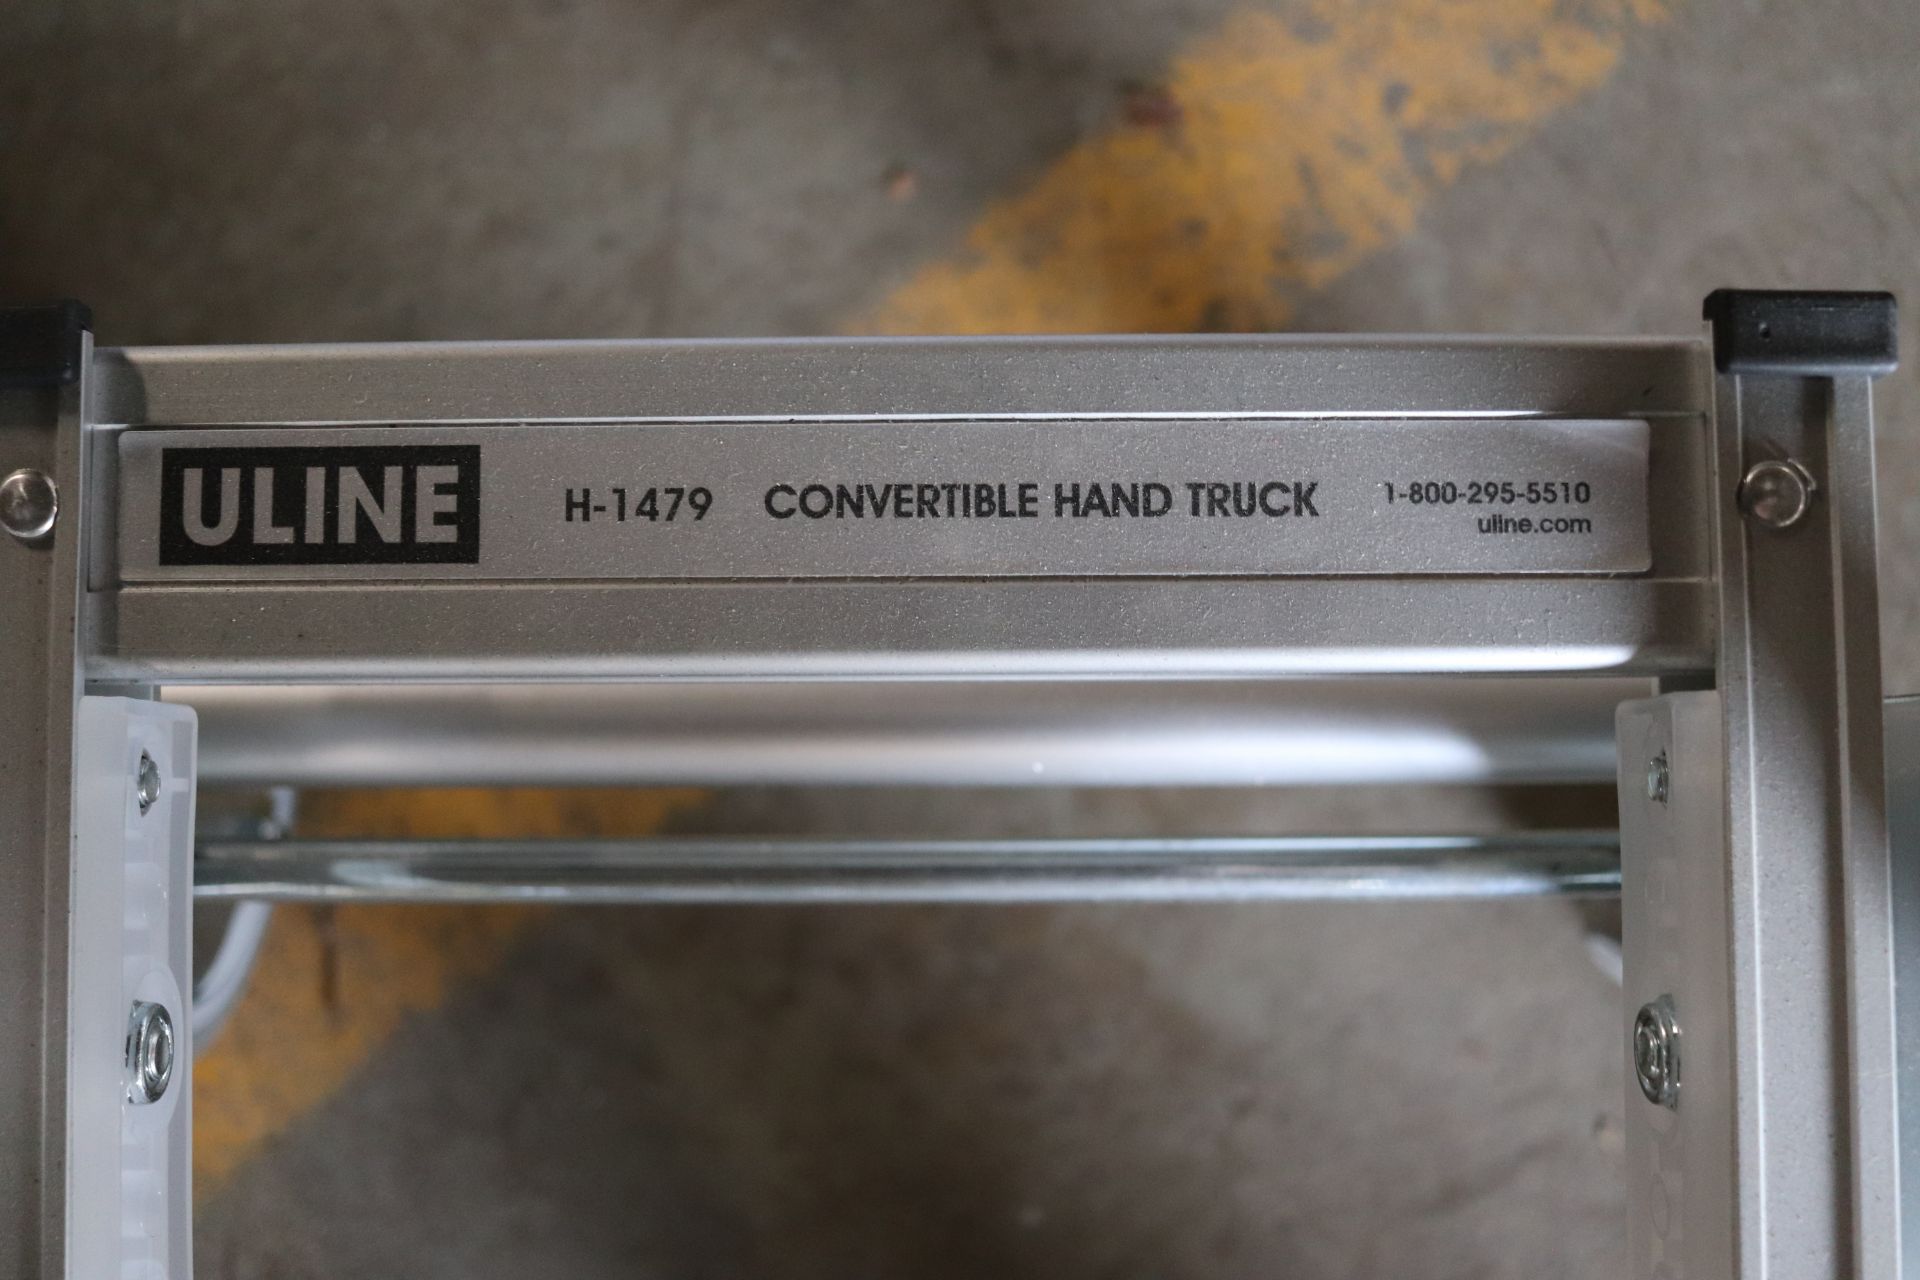 Uline convertible hand truck, H147P - Image 2 of 2